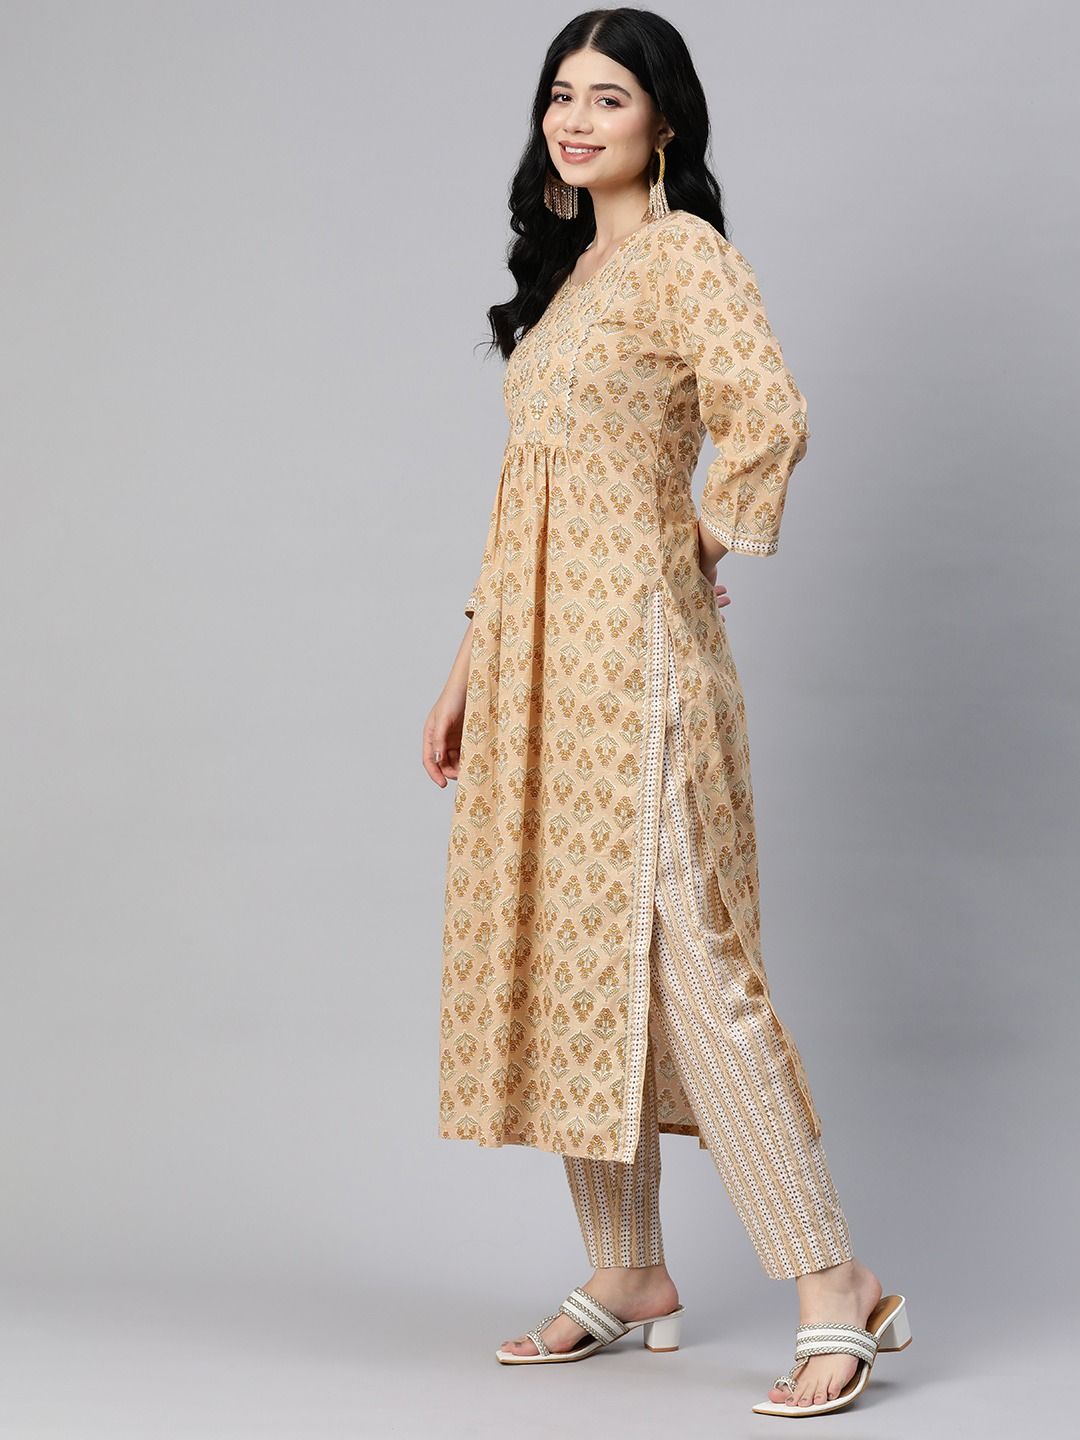 Flared Style Cotton Fabric Peach Color Kurta With Bottom